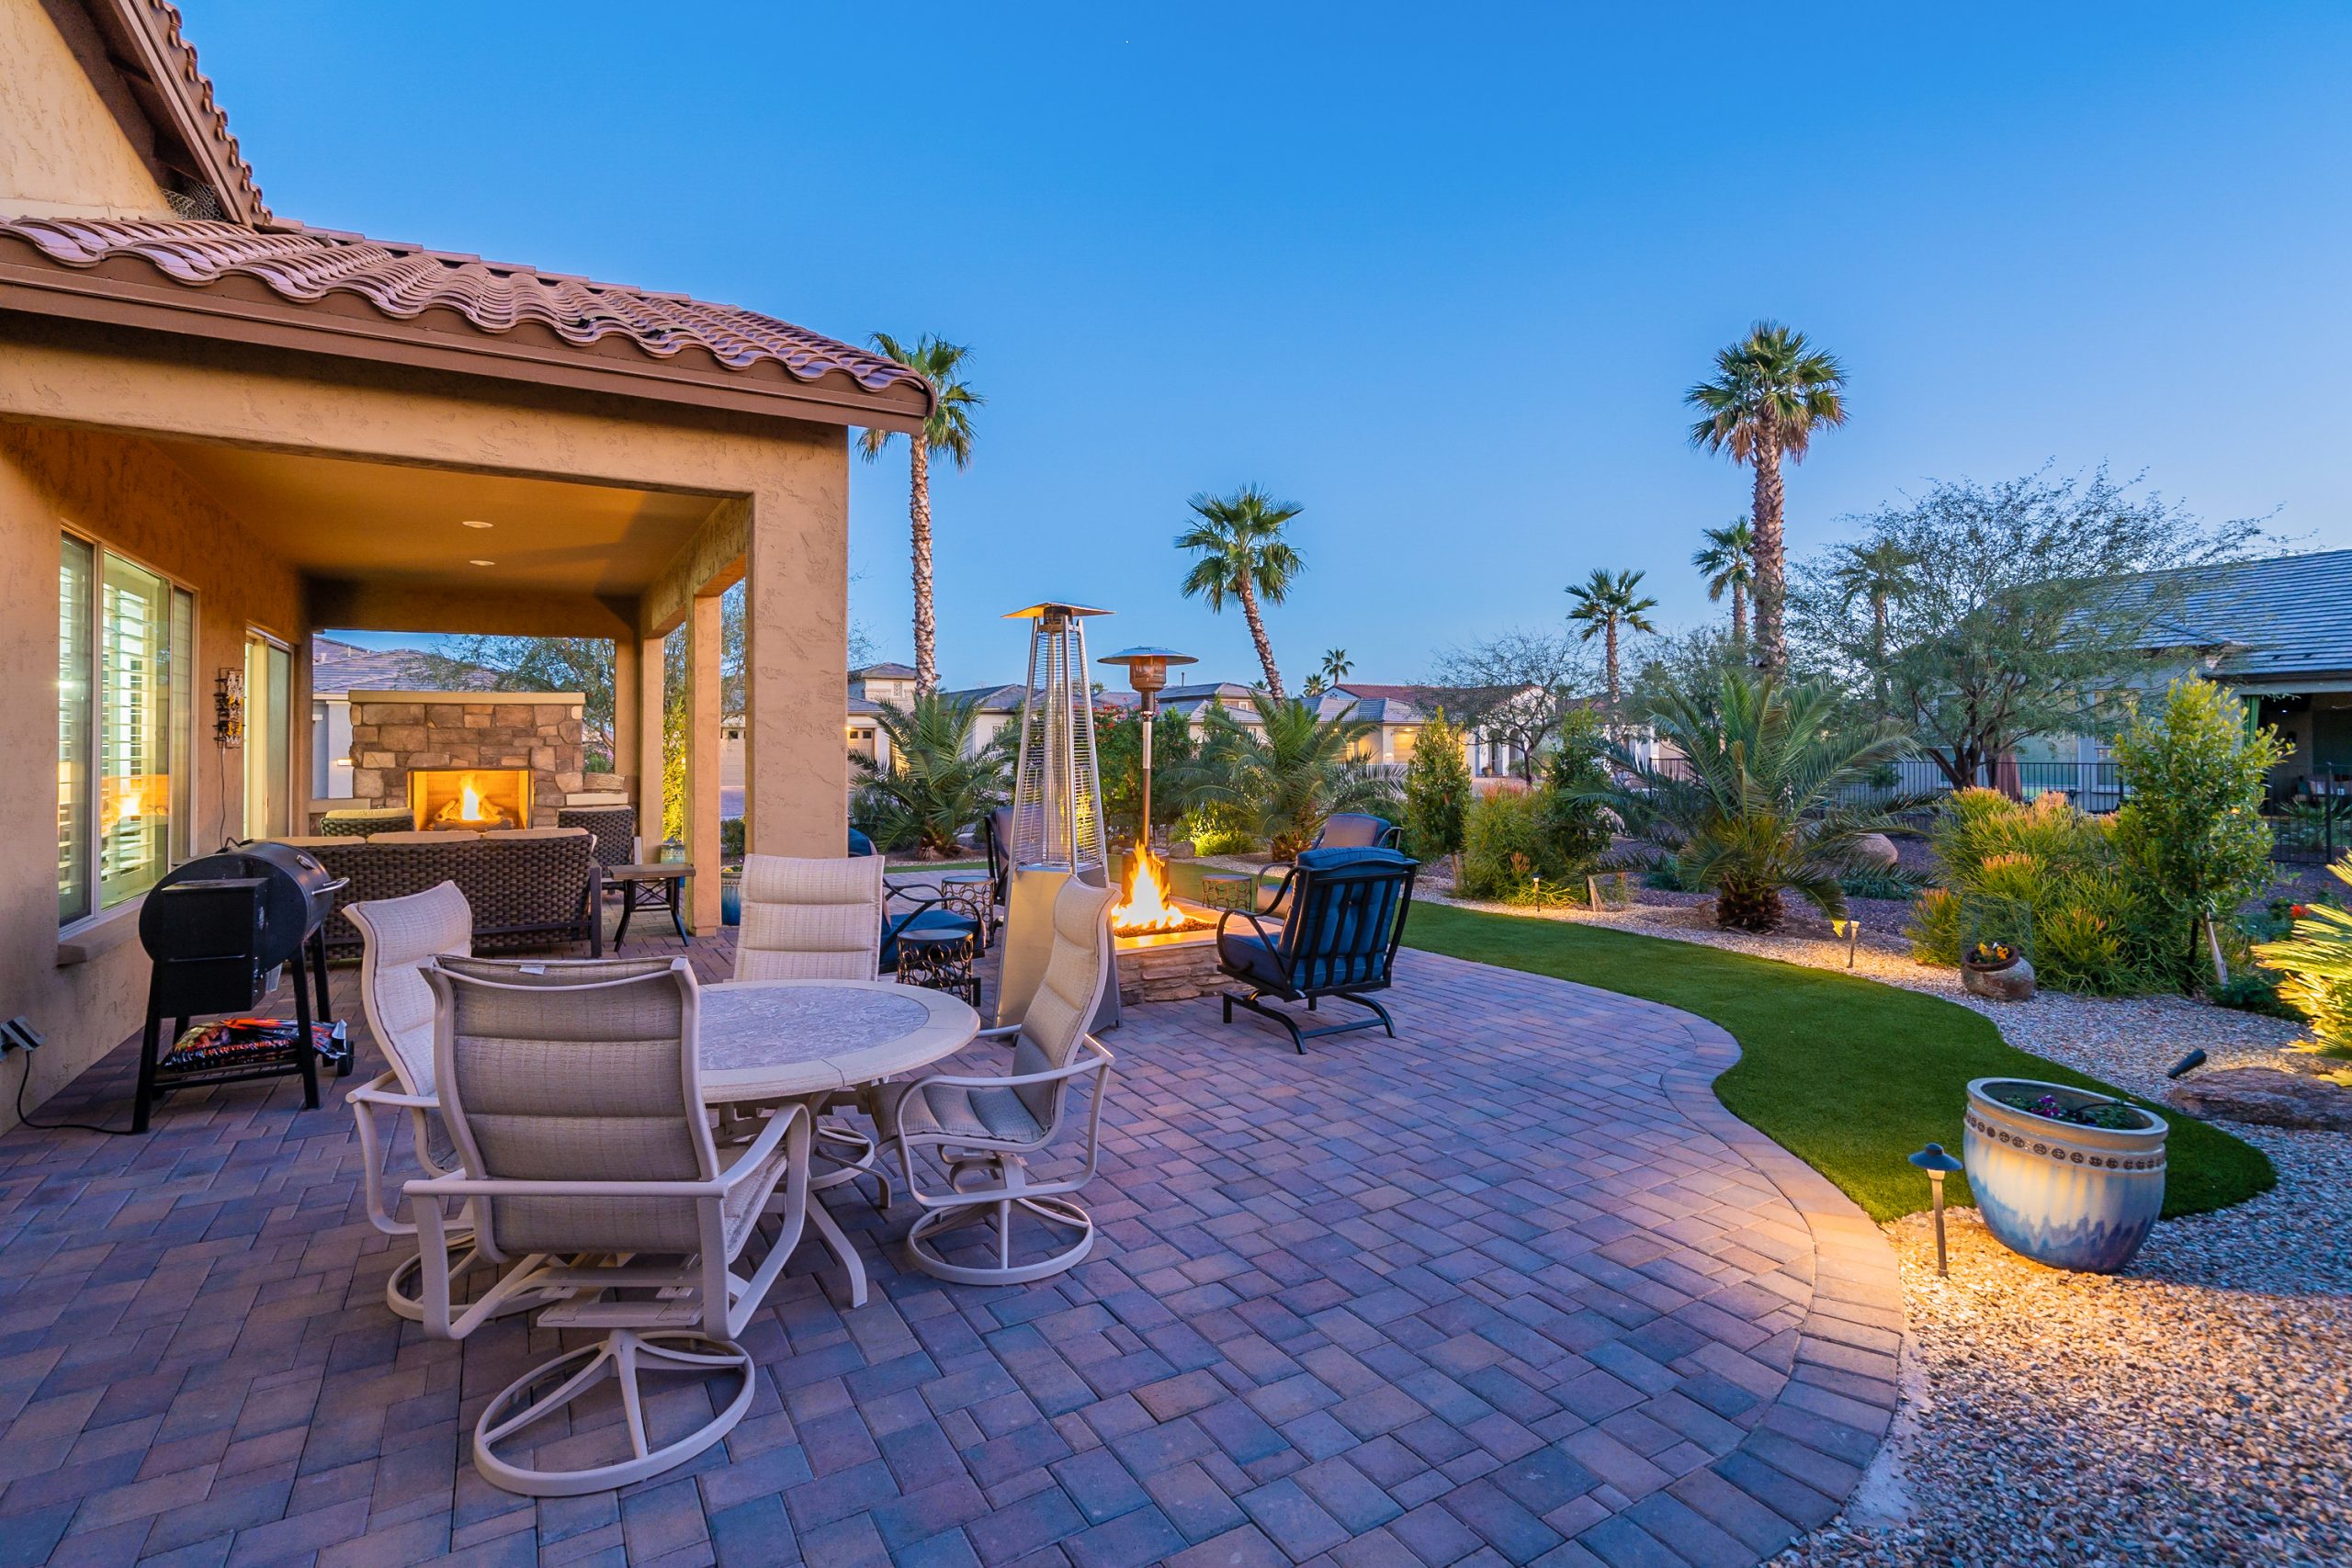 Twilight Image in Goodyear, AZ of a backyard with custom pavers and artificial grass